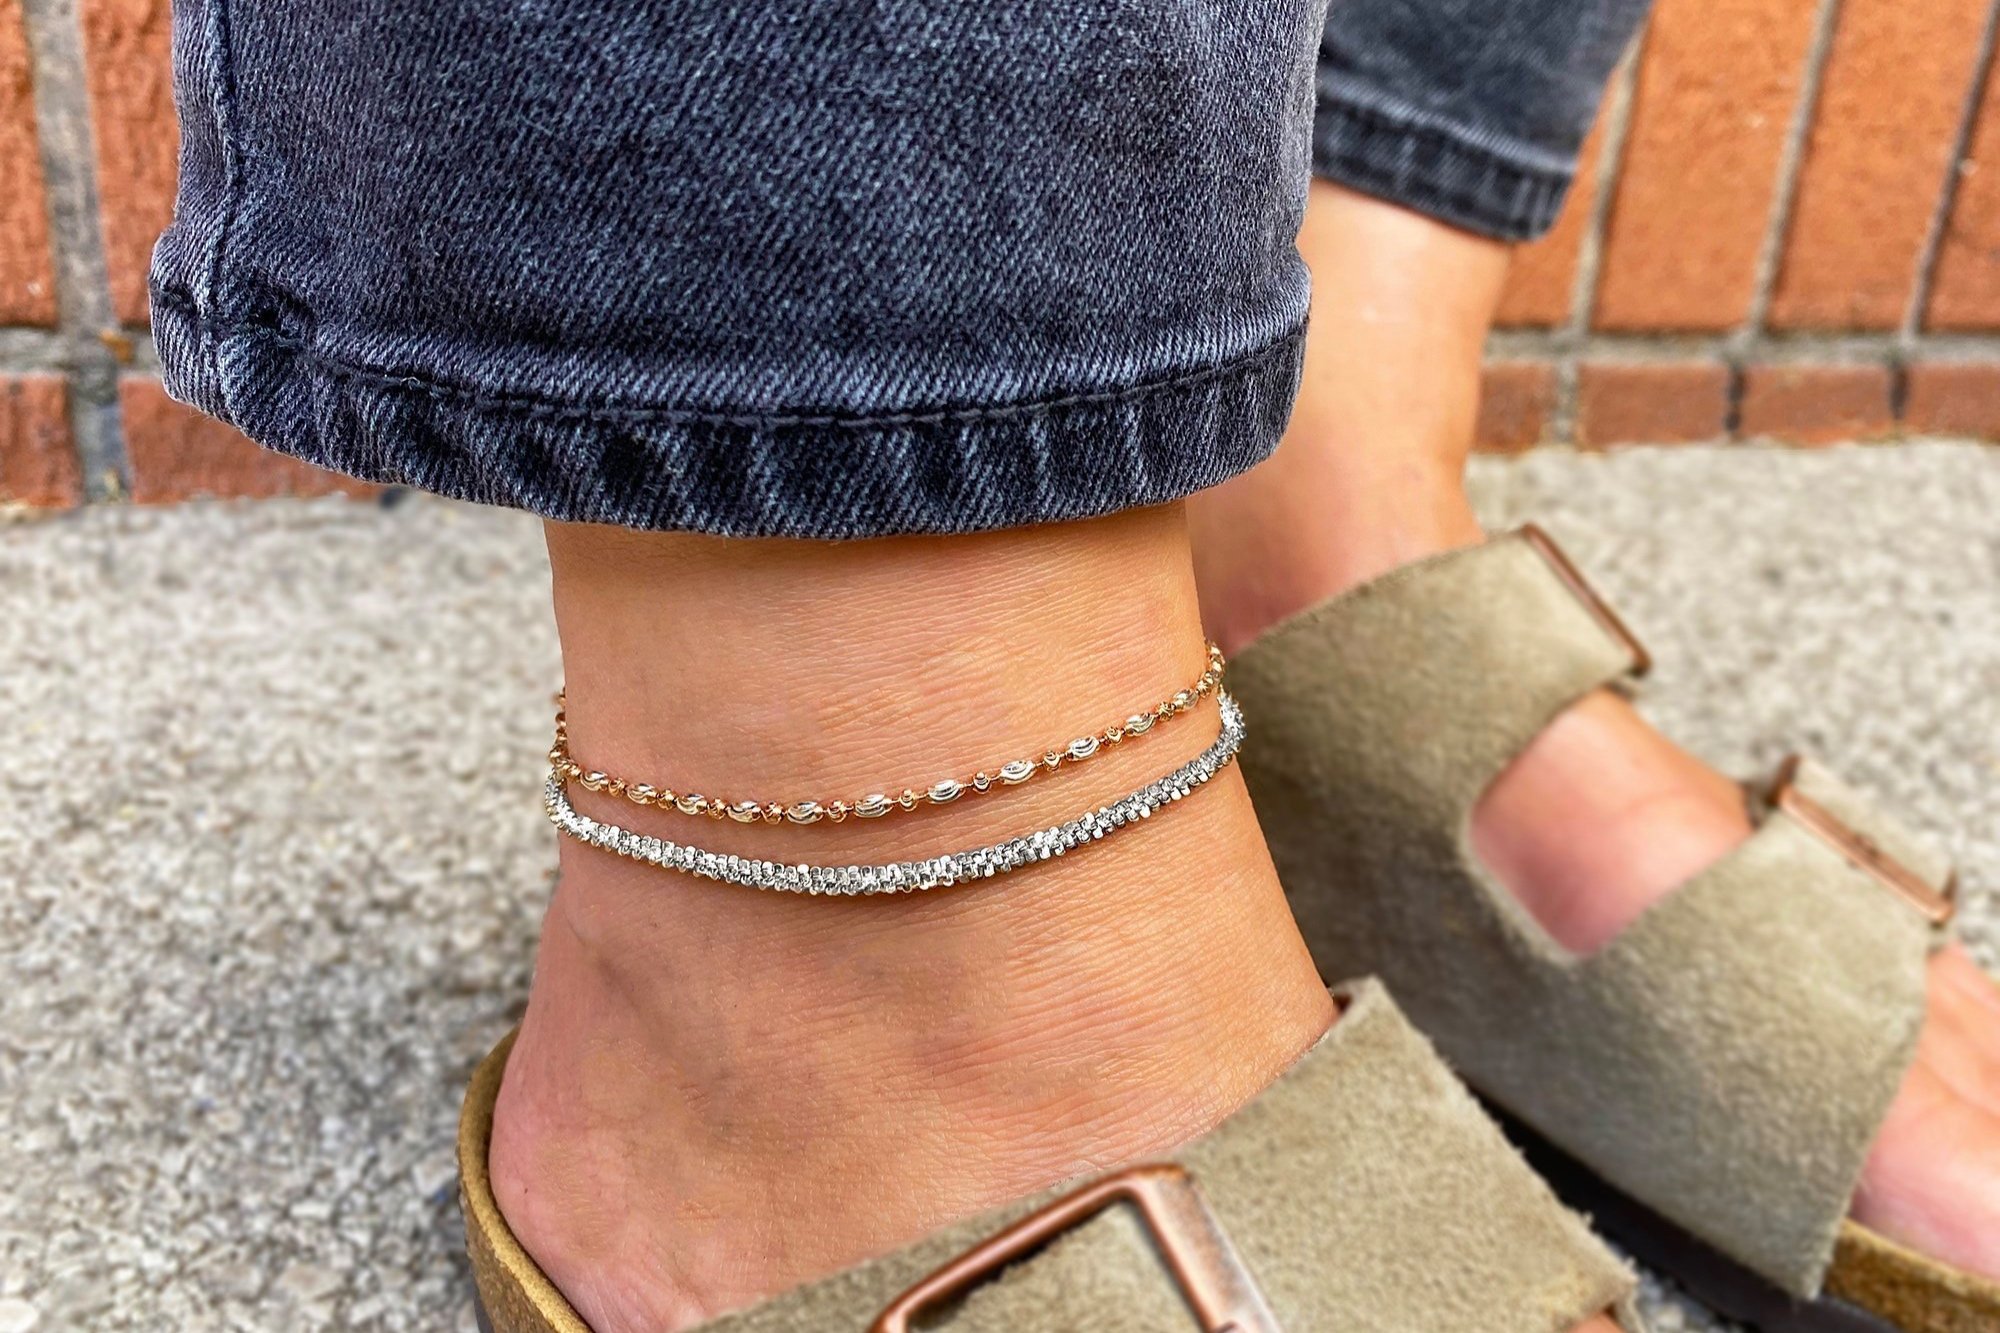 RoseGold Ankle Bracelet for Women - Adjustable Dainty Layered Chains,Heart  Anklets for Girls - Fashion Stainless Steel Link Foot Jewellery RoseGold -  A